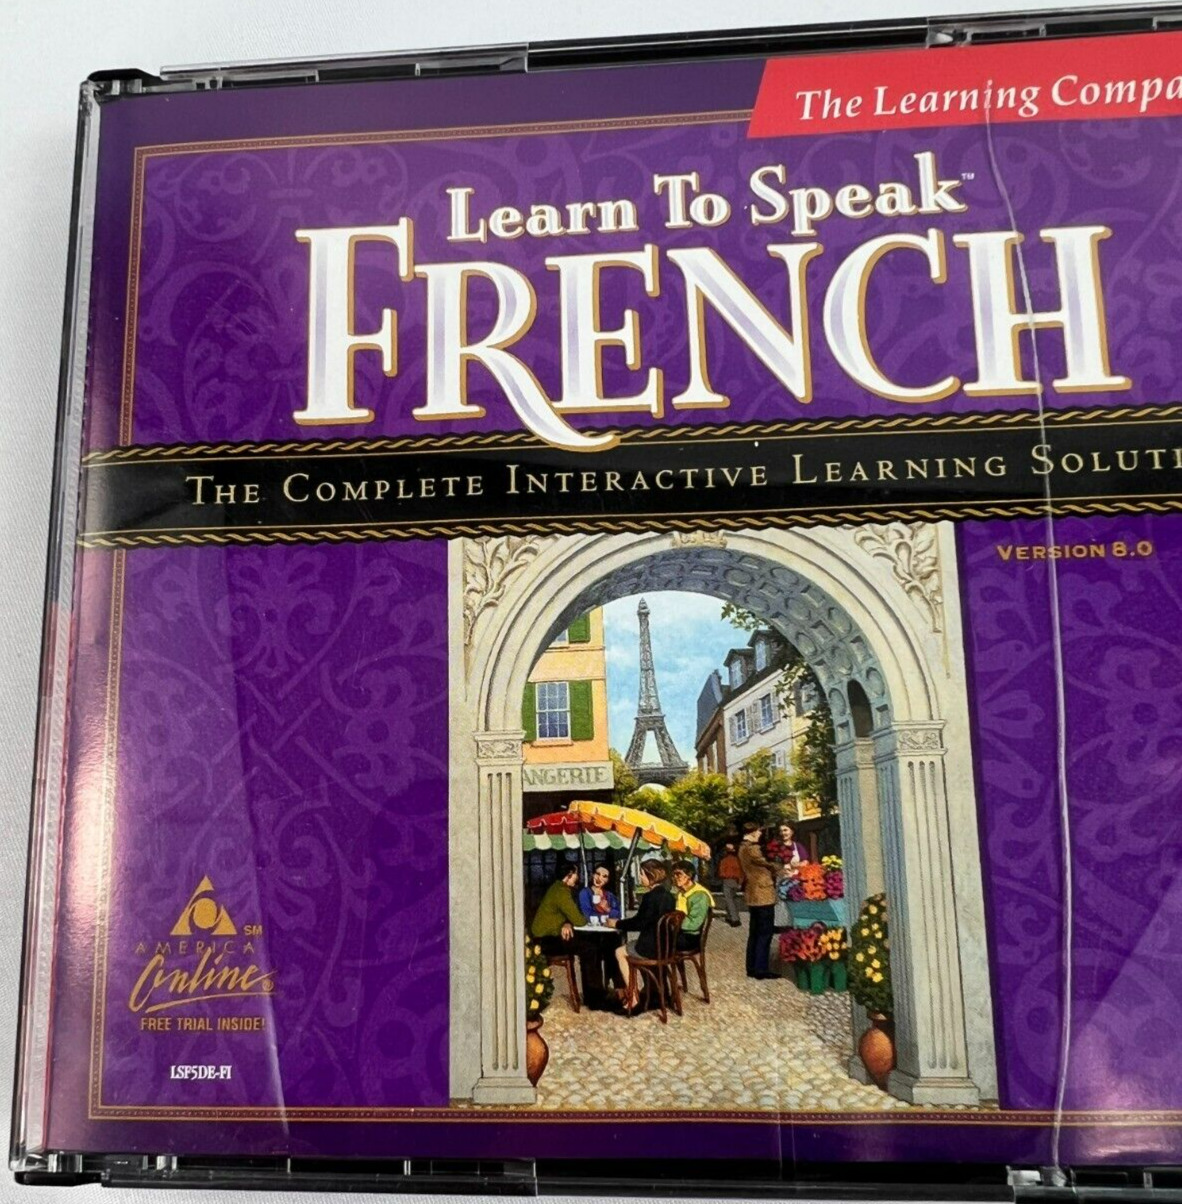 The Learning Company: Learn To Speak French 4 CD-ROM Set Language Audio Program